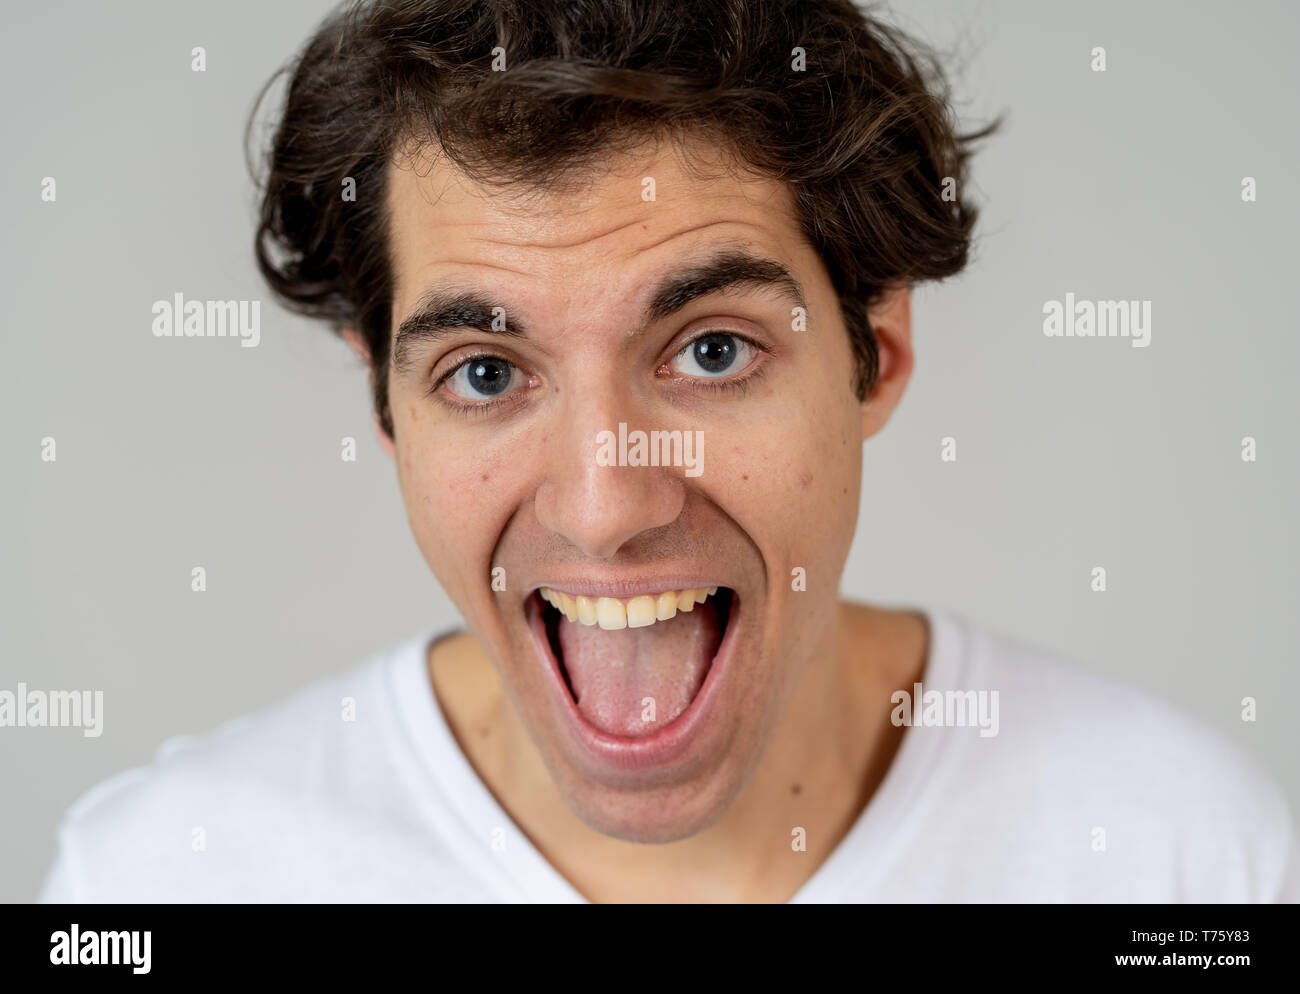 Portrait of young millennial funny male having fun bursting into laughing loudly after hearing humor anecdotes and jokes. Isolated against neutral bac Stock Photo